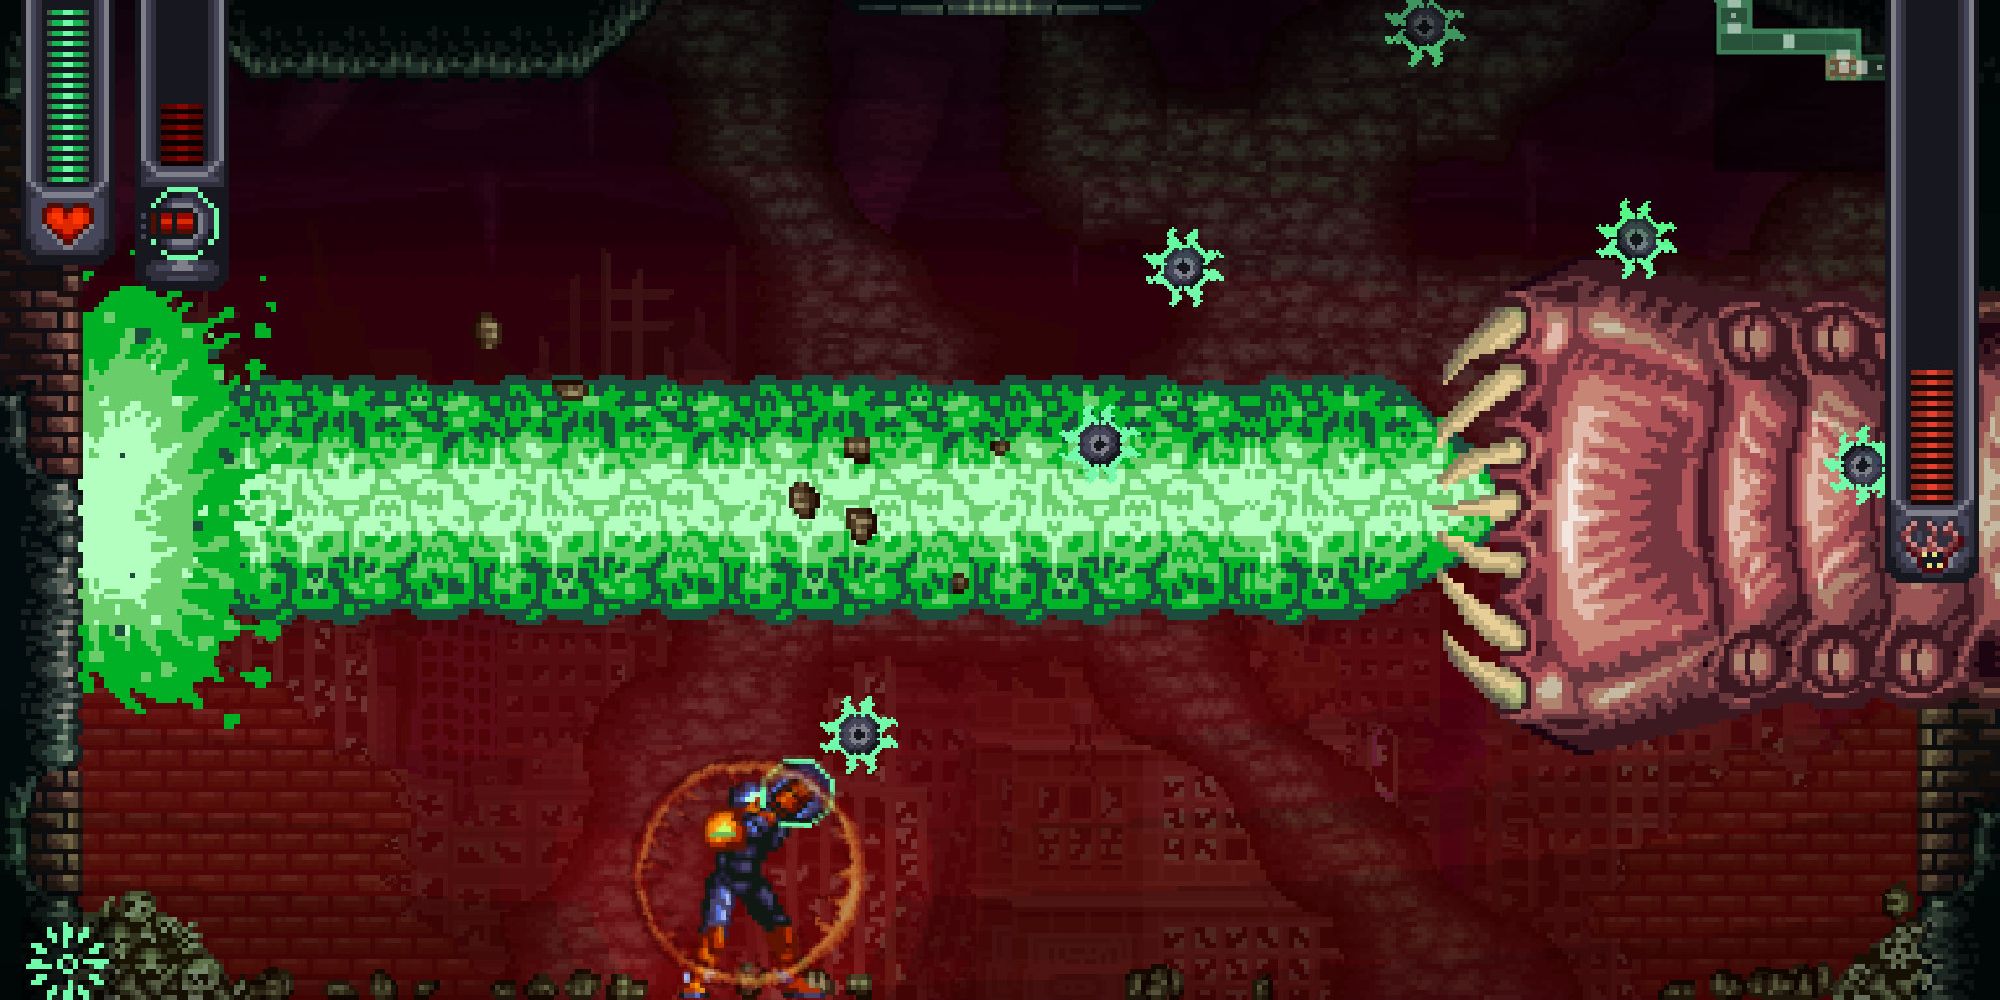 A screenshot from A Robot Named Fight, showing the main character firing a weapon at a vomiting worm-monster